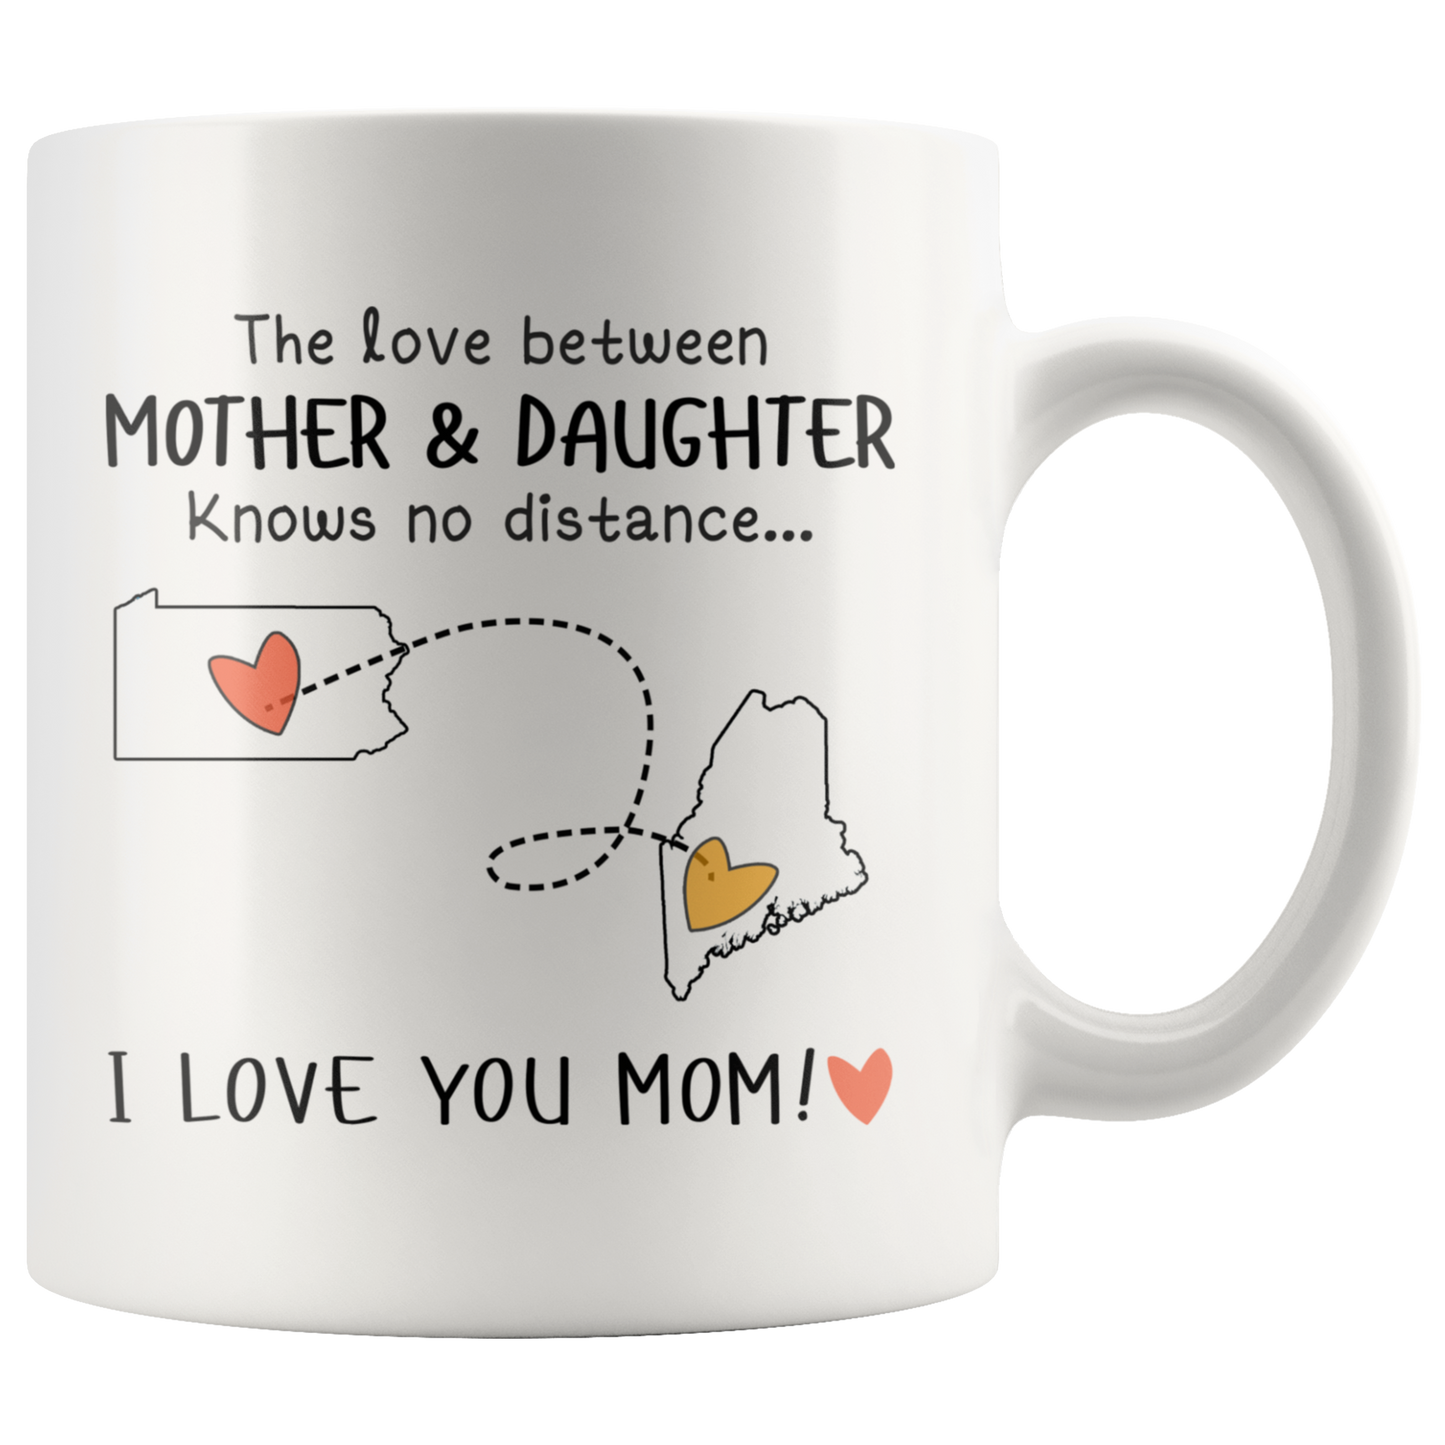 AS193674-sp-23543 - [ Pennsylvania | Maine ]Pennsylvania Maine The Love Between Mother and Daughter Know